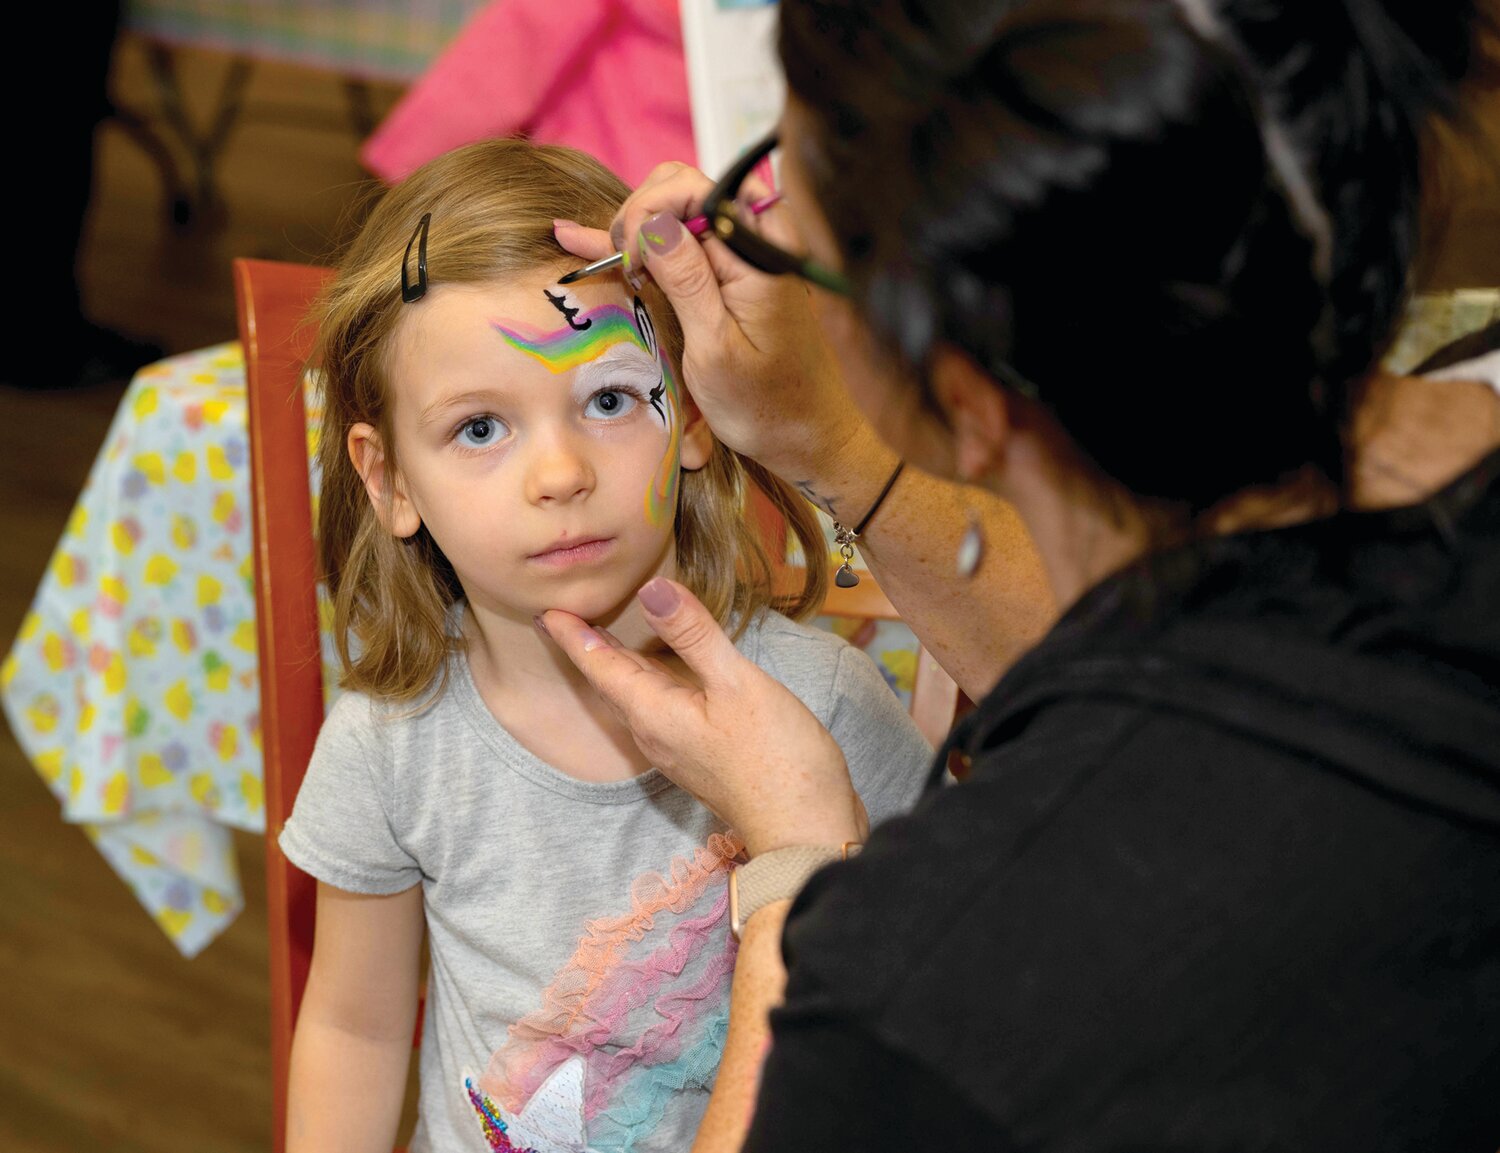 Zofia Cendrowski gets a unicorn added to her face by painter Liza Schuck.